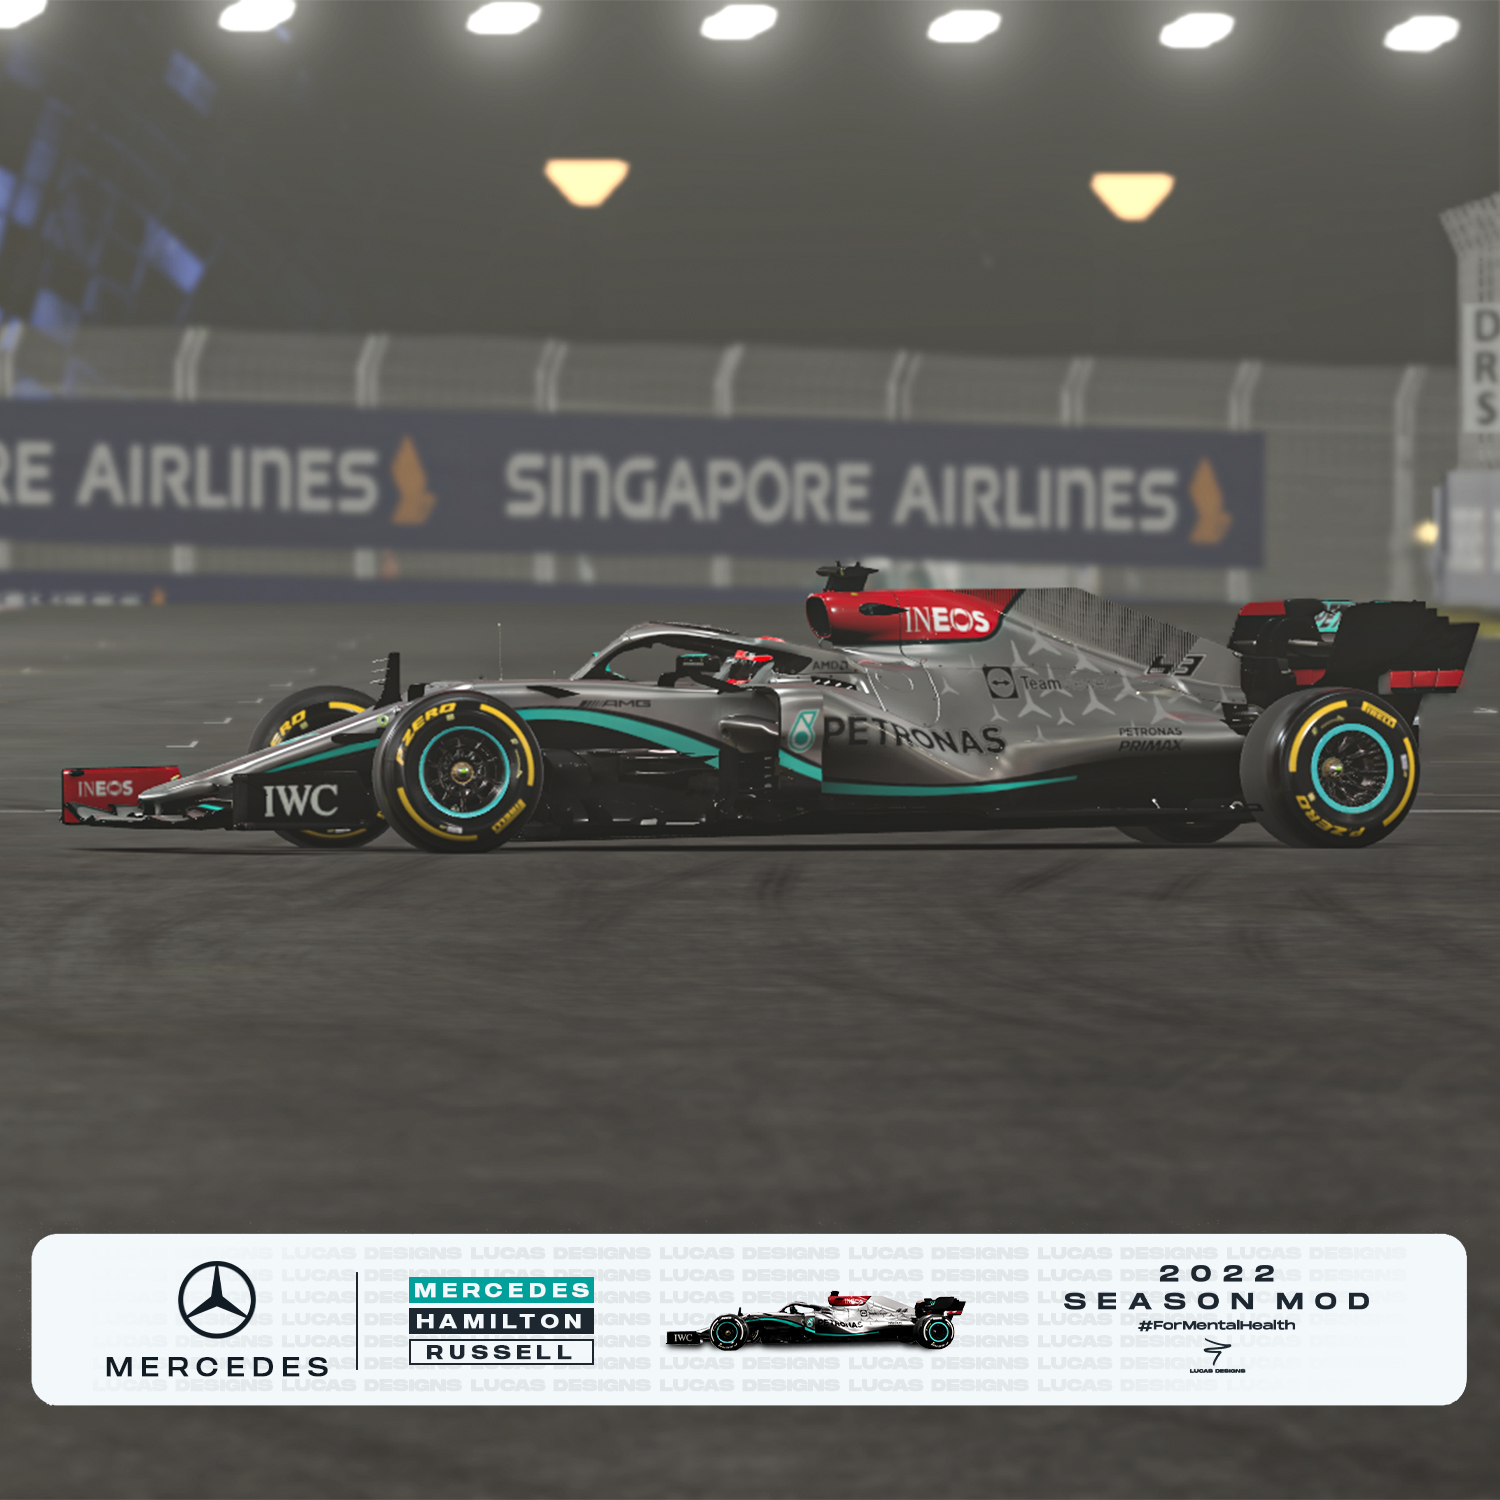 Mercedes official by LD.jpg